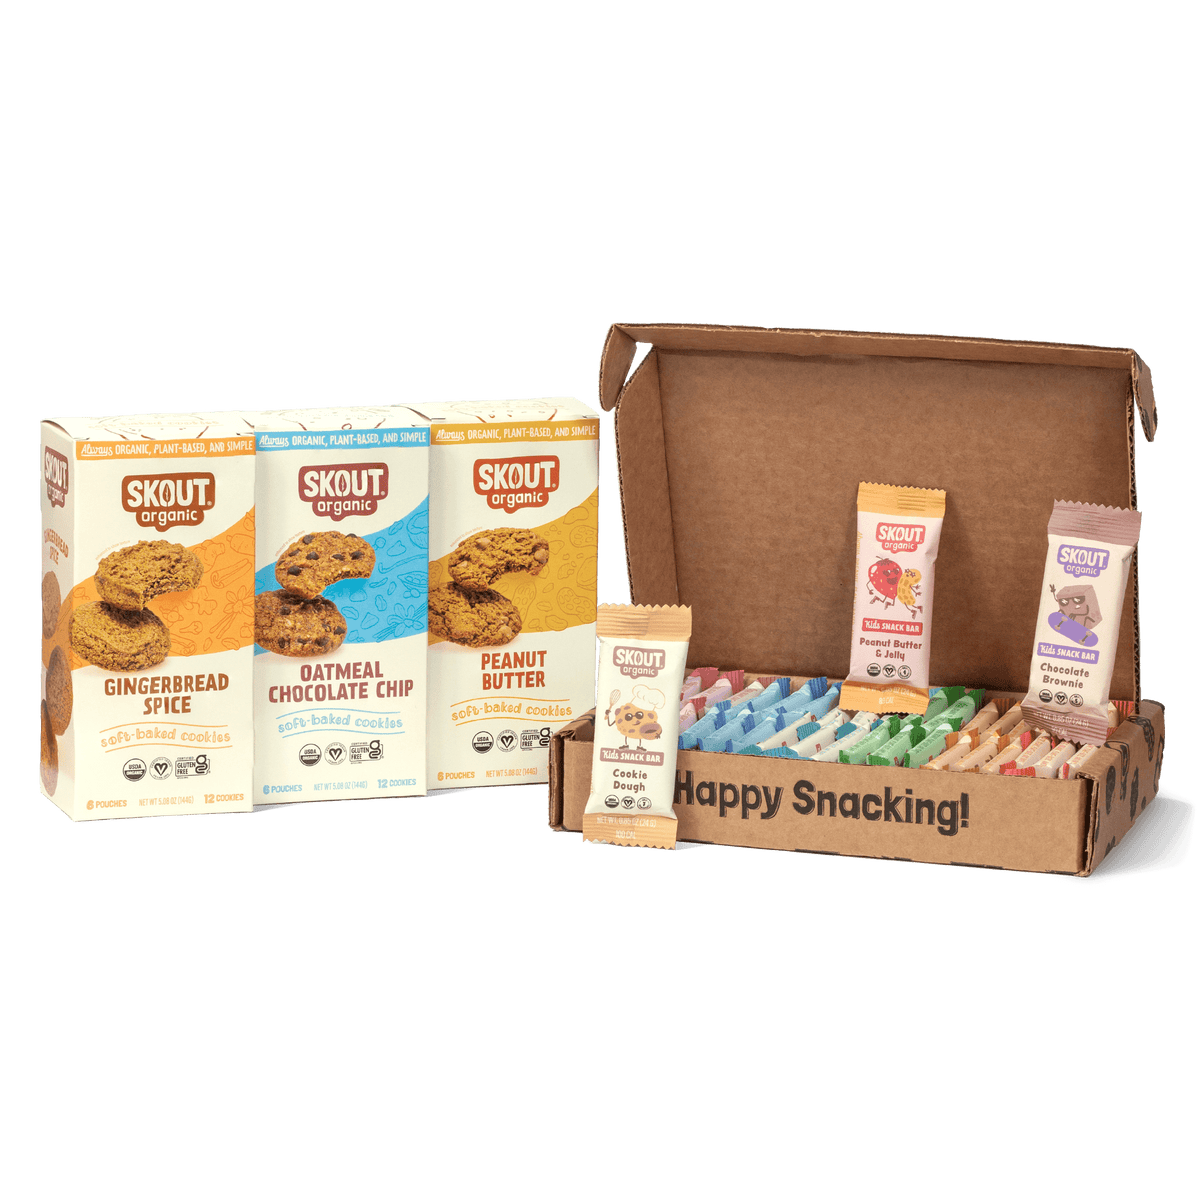 Skout Organic Soft Baked Cookie and Kids Bar Bundle Soft Baked Cookies Skout Organic 36 Kids Bars + 3 Boxes of Cookies 